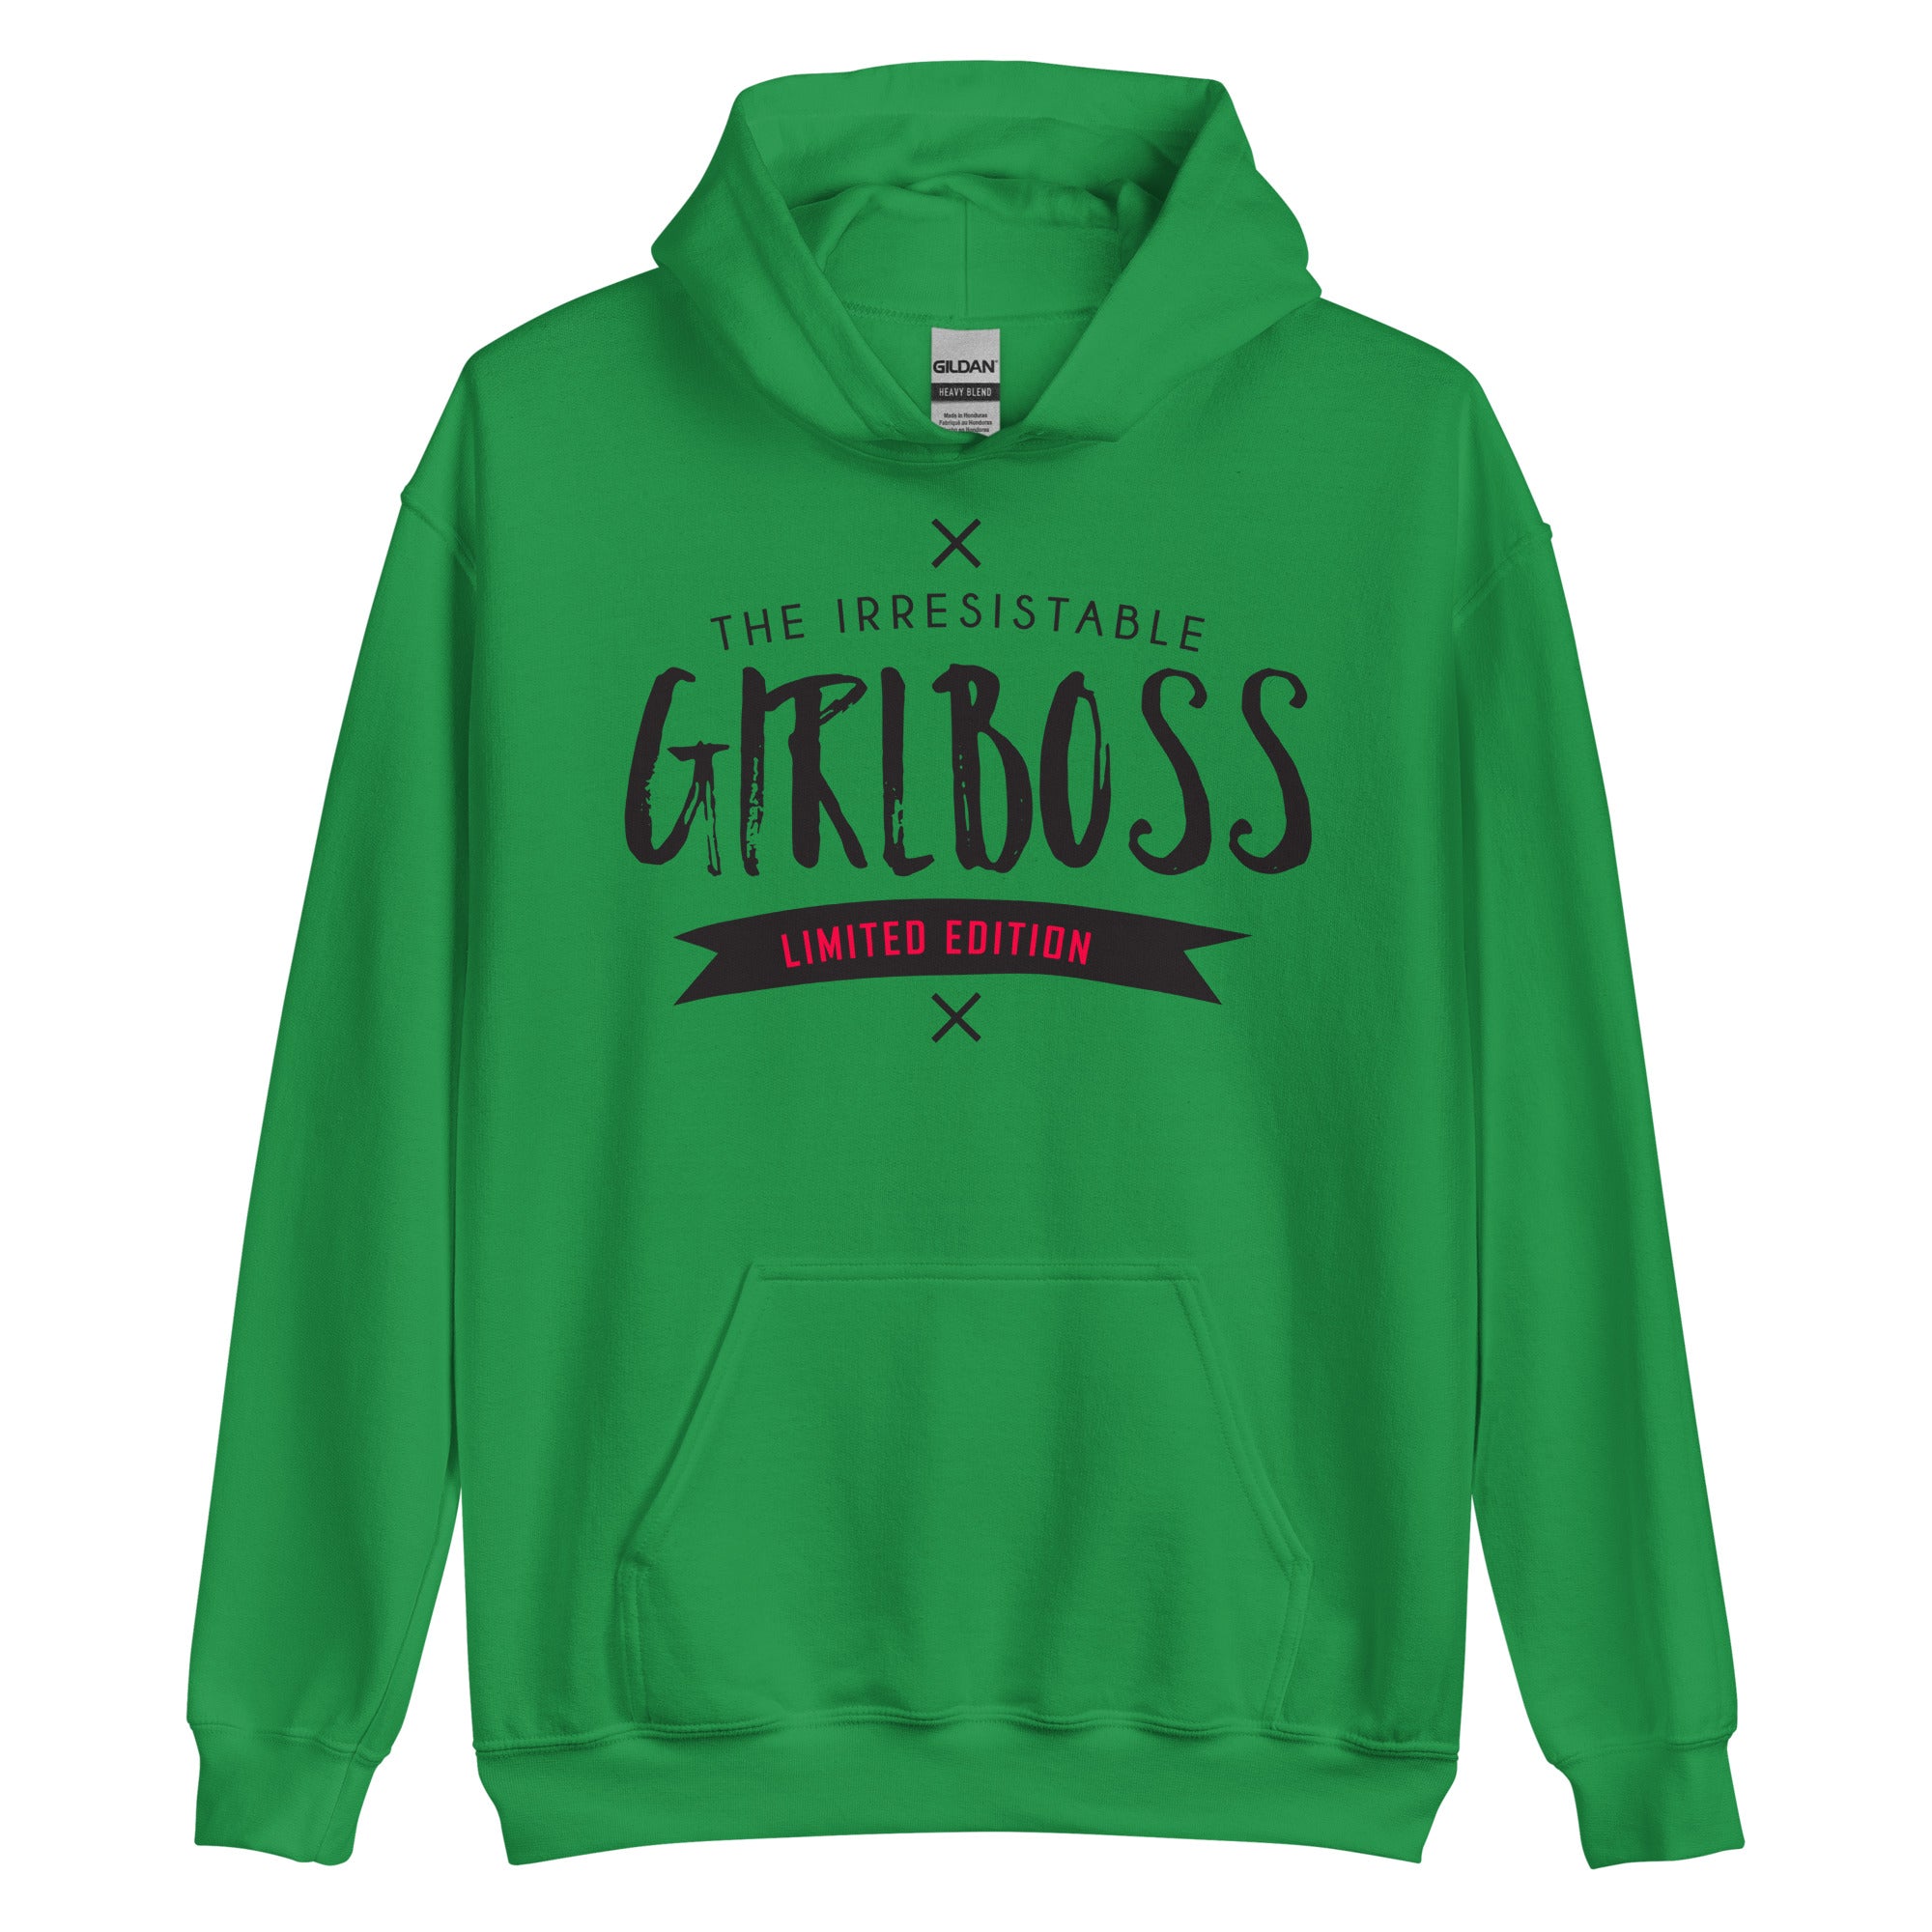 Limited Edition The Irresistable Girl Boss Hoodie for Women